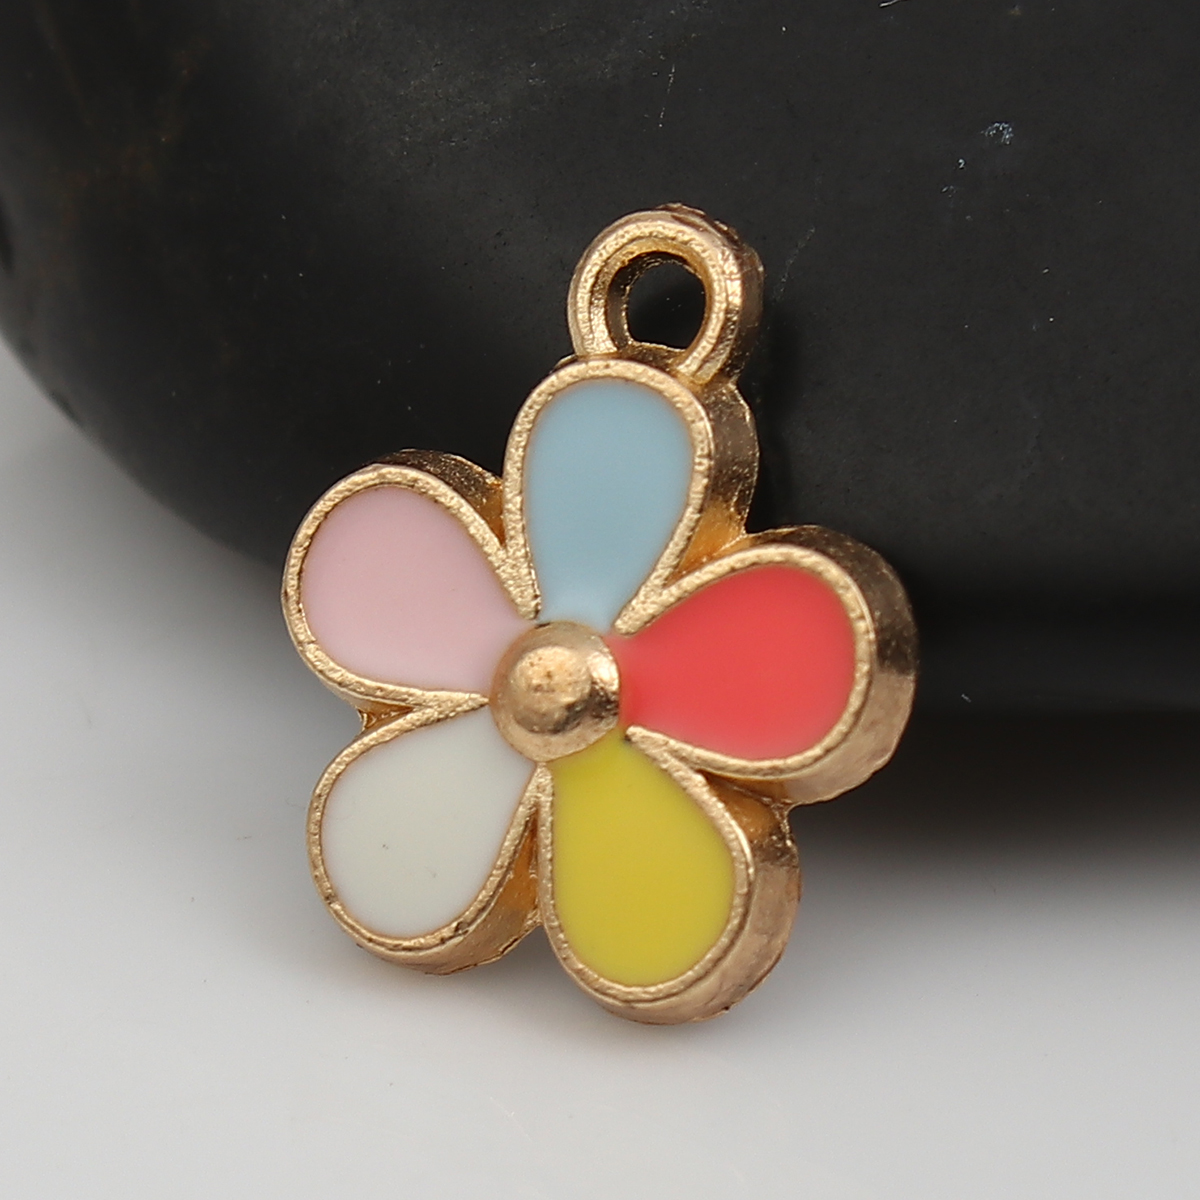 Picture of Zinc Based Alloy Charms Flower Gold Plated Multicolor Enamel 16mm( 5/8") x 13mm( 4/8"), 10 PCs